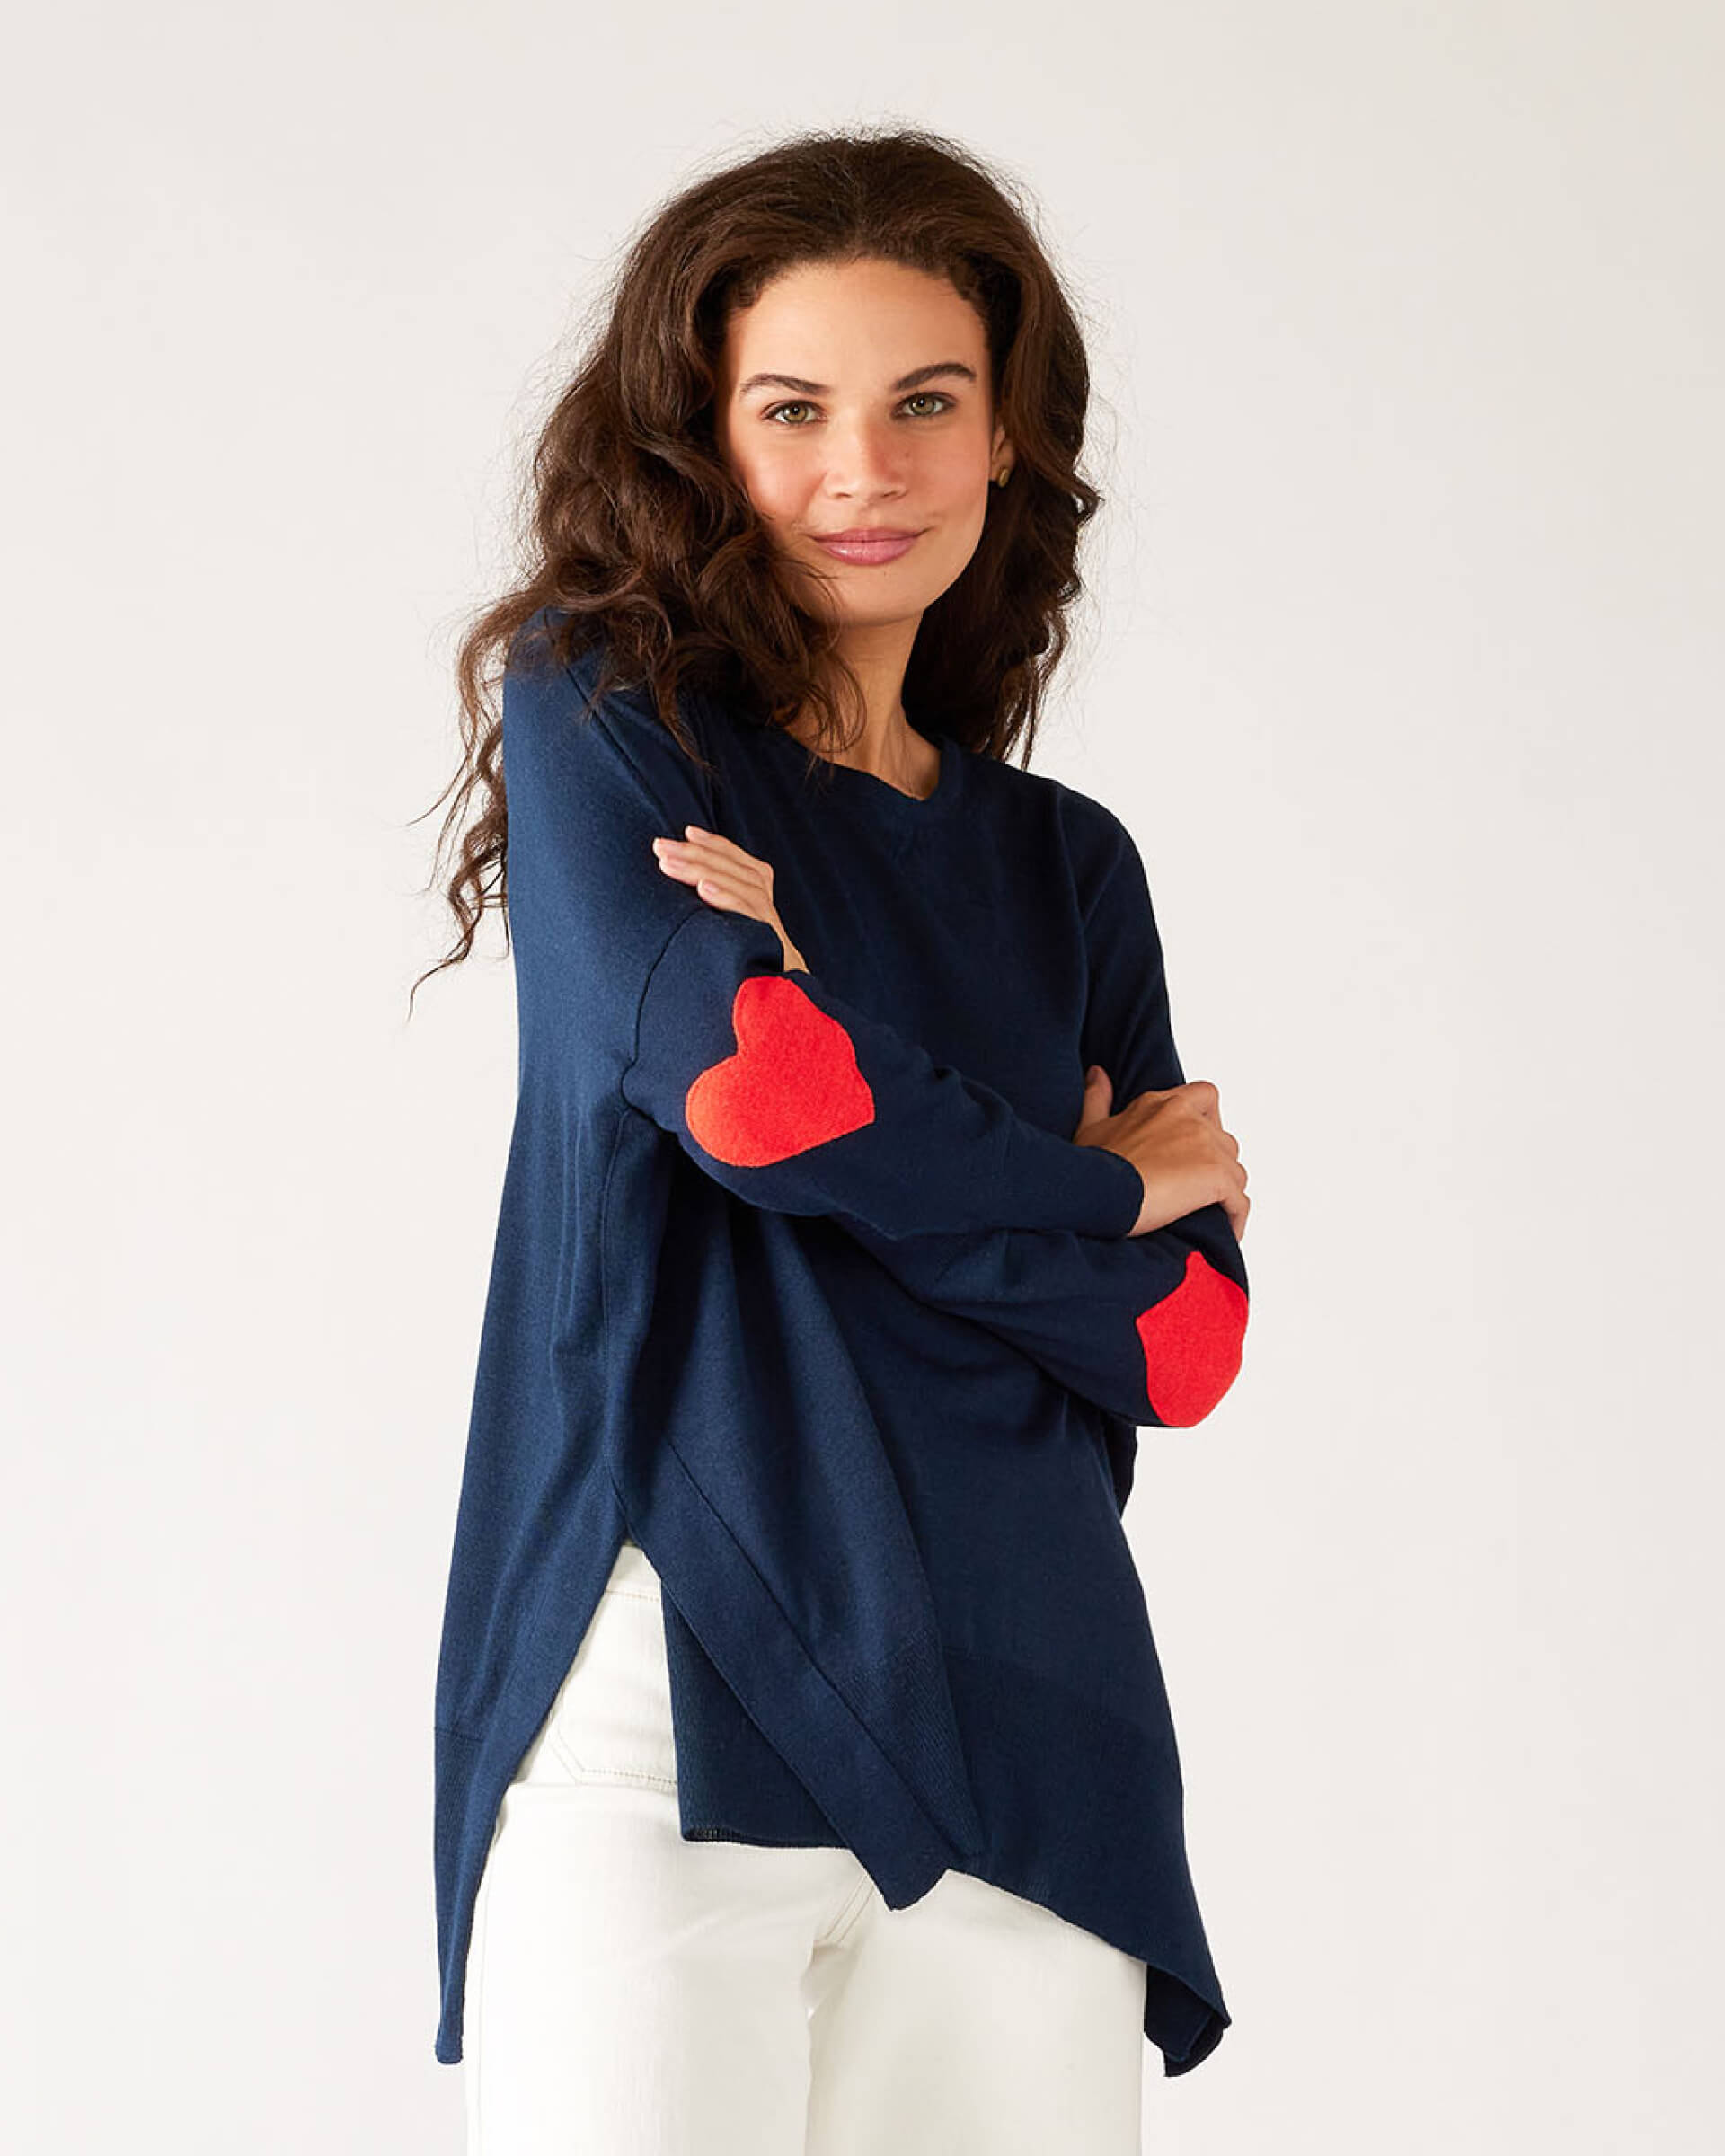 Women's One Size Navy Sweater with Red Hearts On Sleeve Chest View